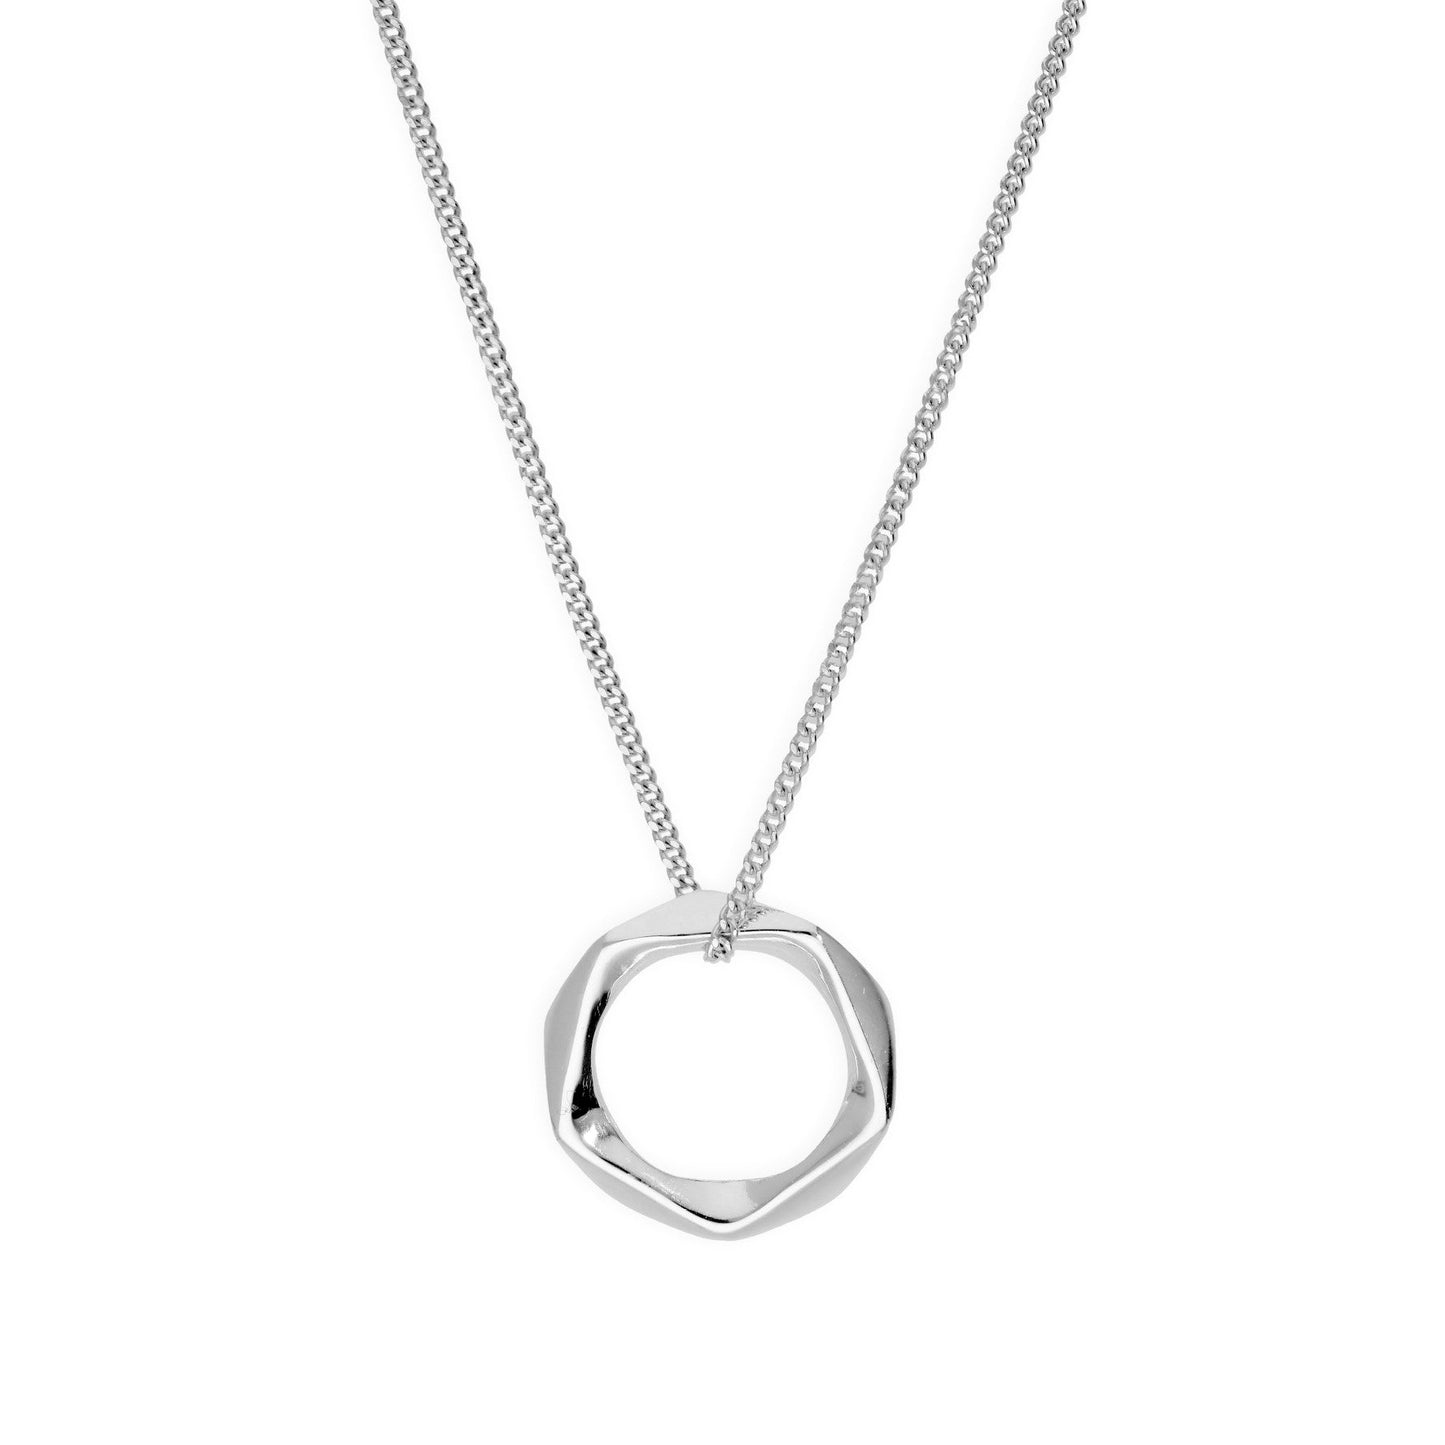 Sterling Silver Polished Pentagon Cut Ring Bead Pendant Necklace 16-22 Inches